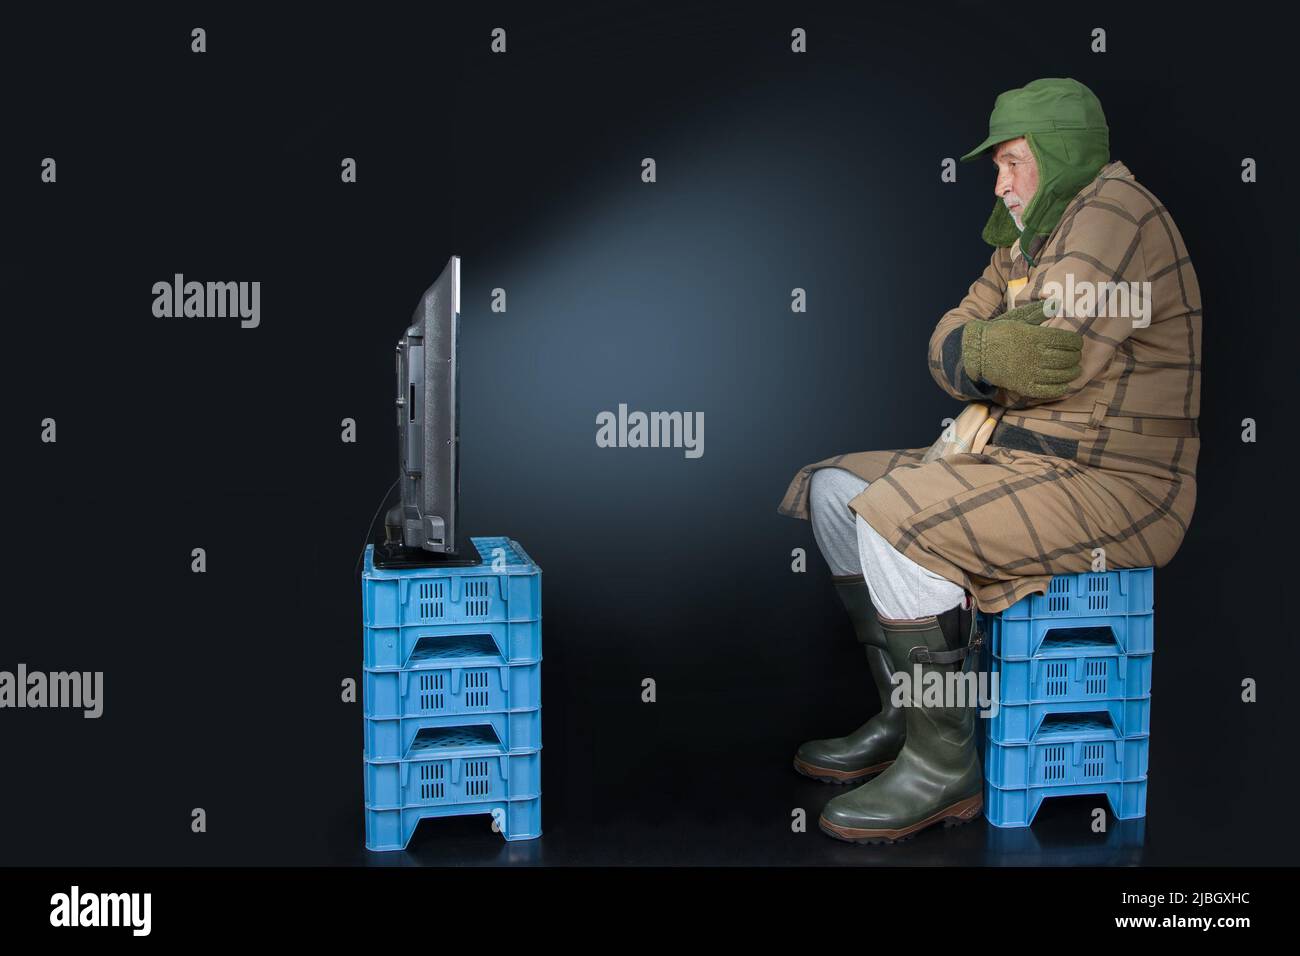 Freeze for Peace. TV evening autumn 2022 in Germany? A man, dressed warmly, is sitting on plastic boxes in front of the television. Stock Photo